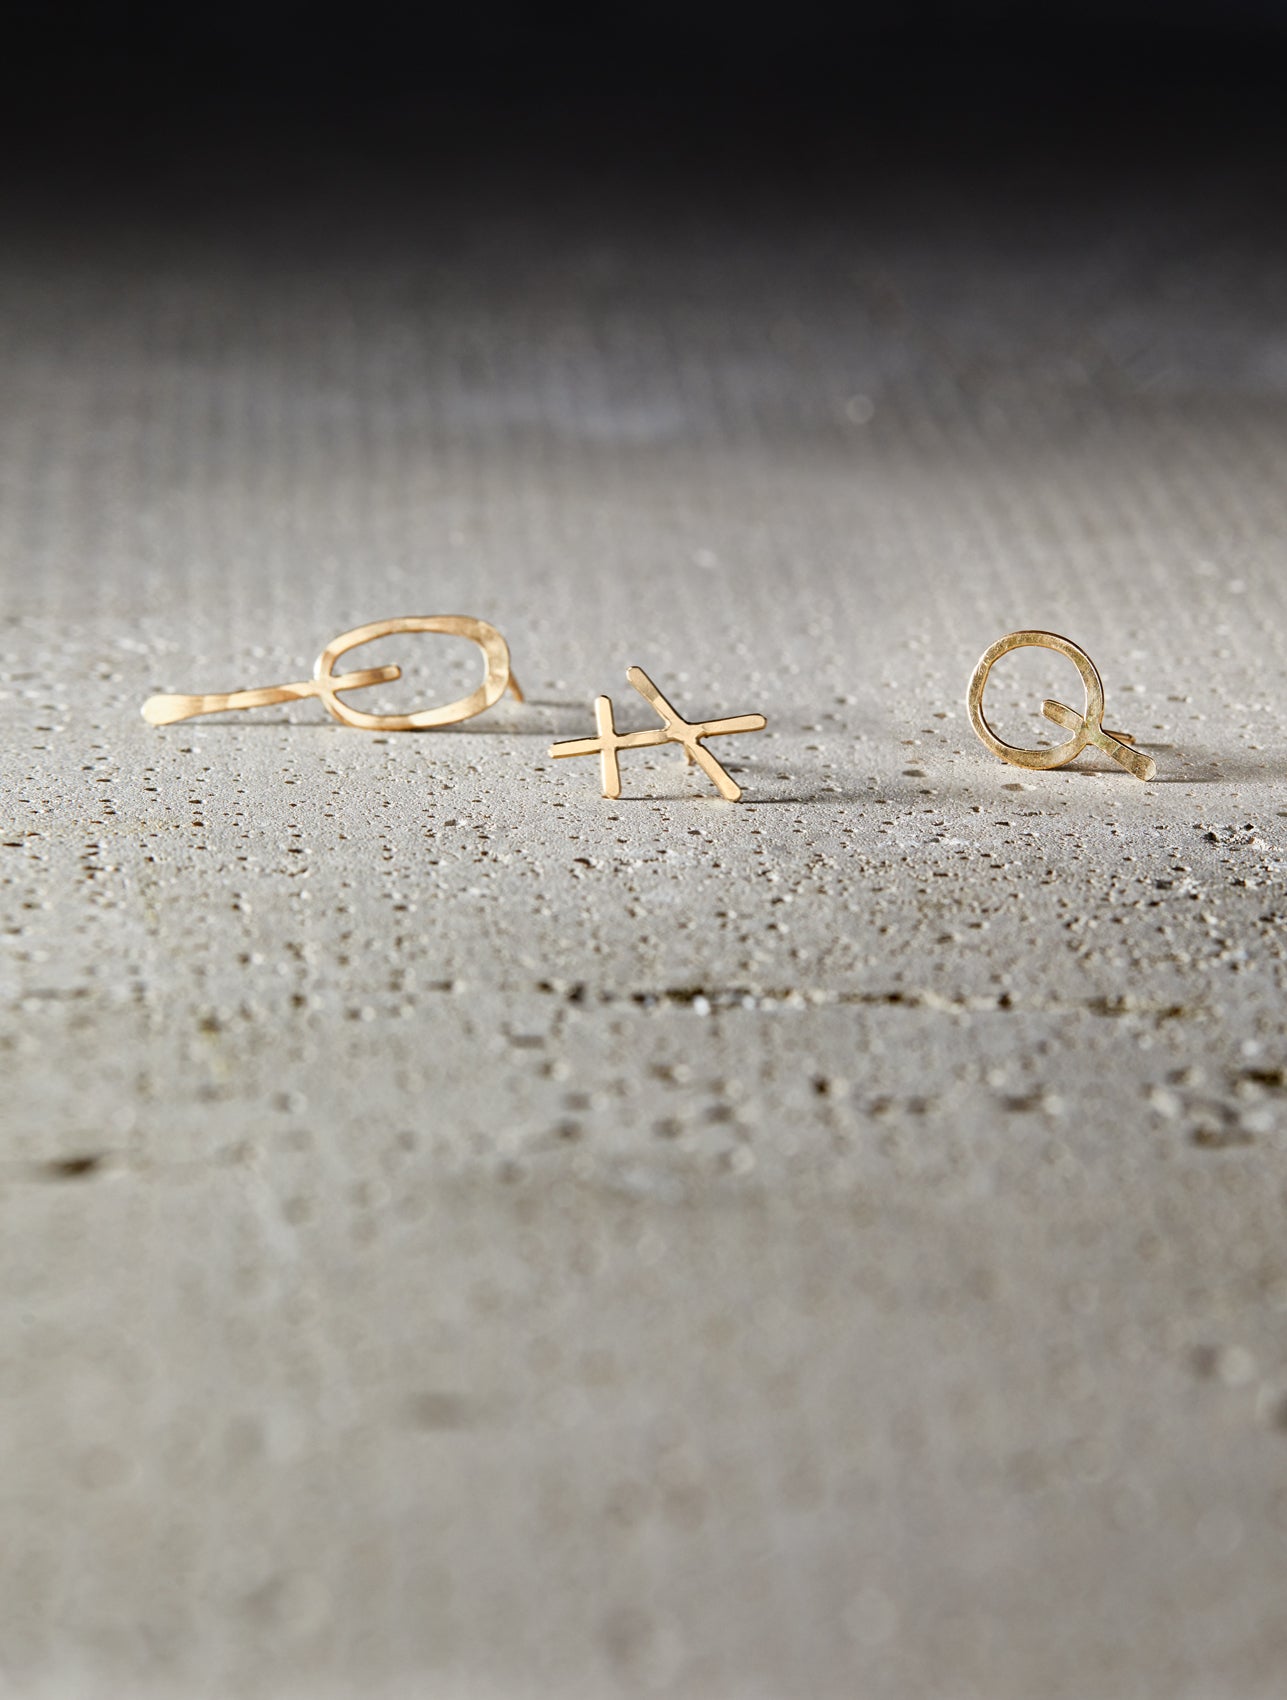 These modern Transcend Studs feature a 14k gold hand hammered oval and vertical wire bar drop.